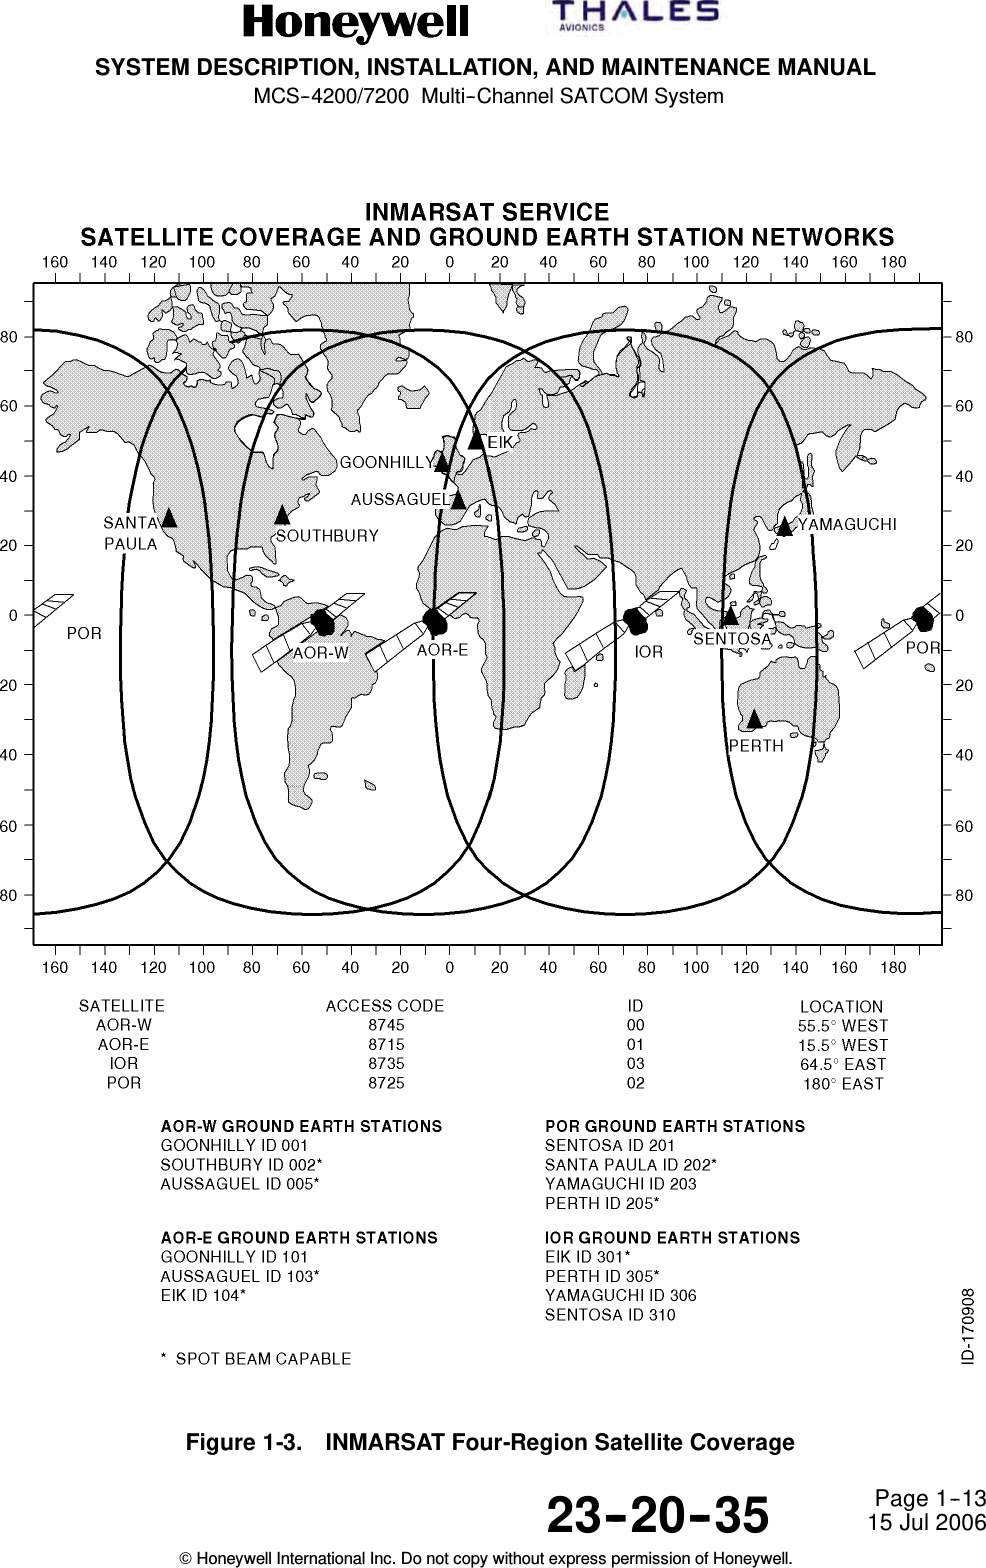 SYSTEM DESCRIPTION, INSTALLATION, AND MAINTENANCE MANUALMCS--4200/7200 Multi--Channel SATCOM System23--20--35 15 Jul 2006Honeywell International Inc. Do not copy without express permission of Honeywell.Page 1--13Figure 1-3. INMARSAT Four-Region Satellite Coverage